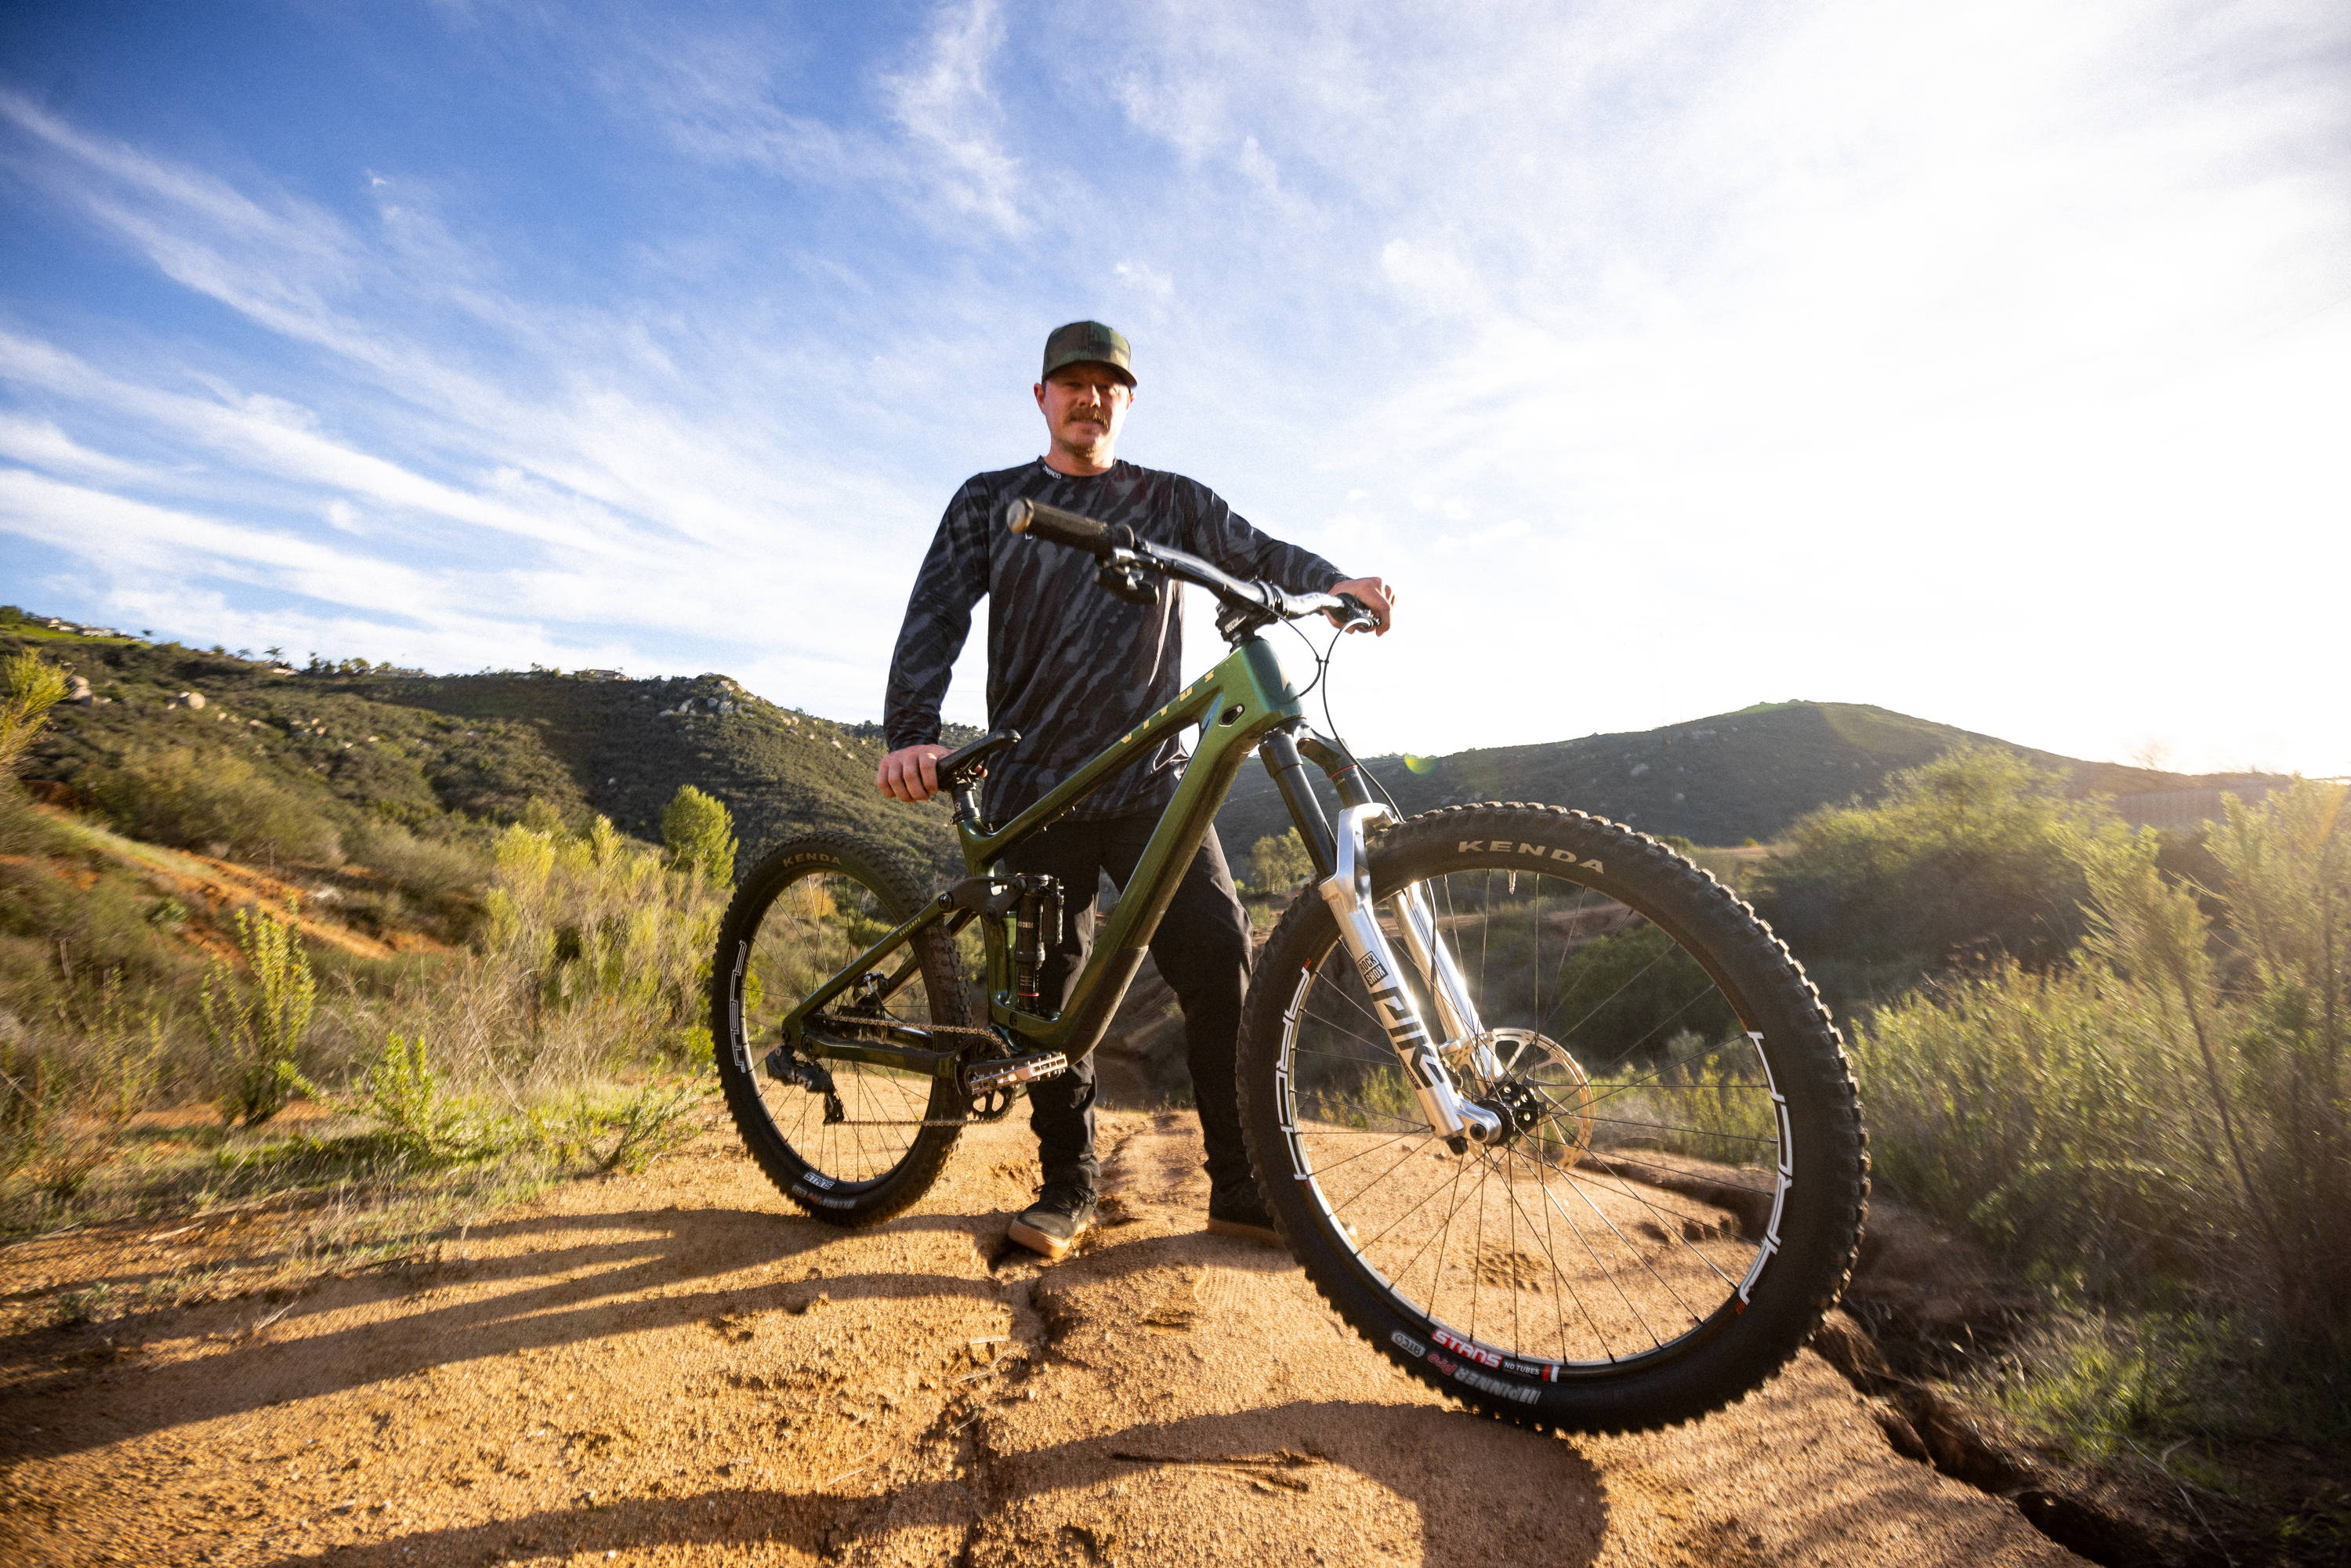 Vitus rider Kyle Strait will be at the Sea Otter Classic this year. 